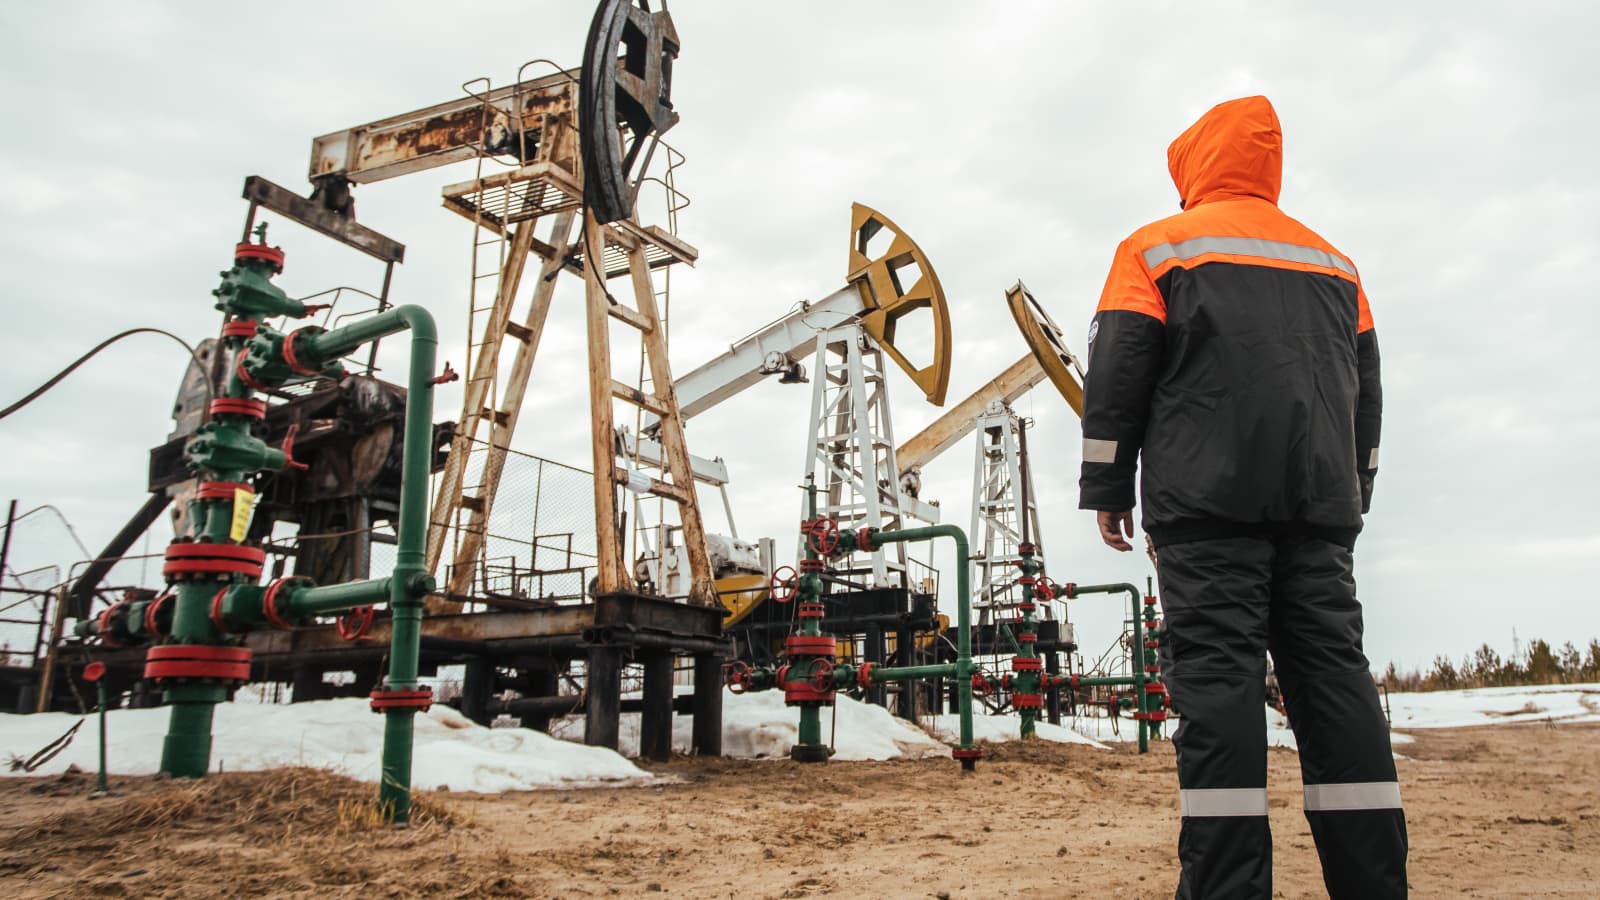 Russia oil and gas: Analysts fear the West may soon hit energy exports